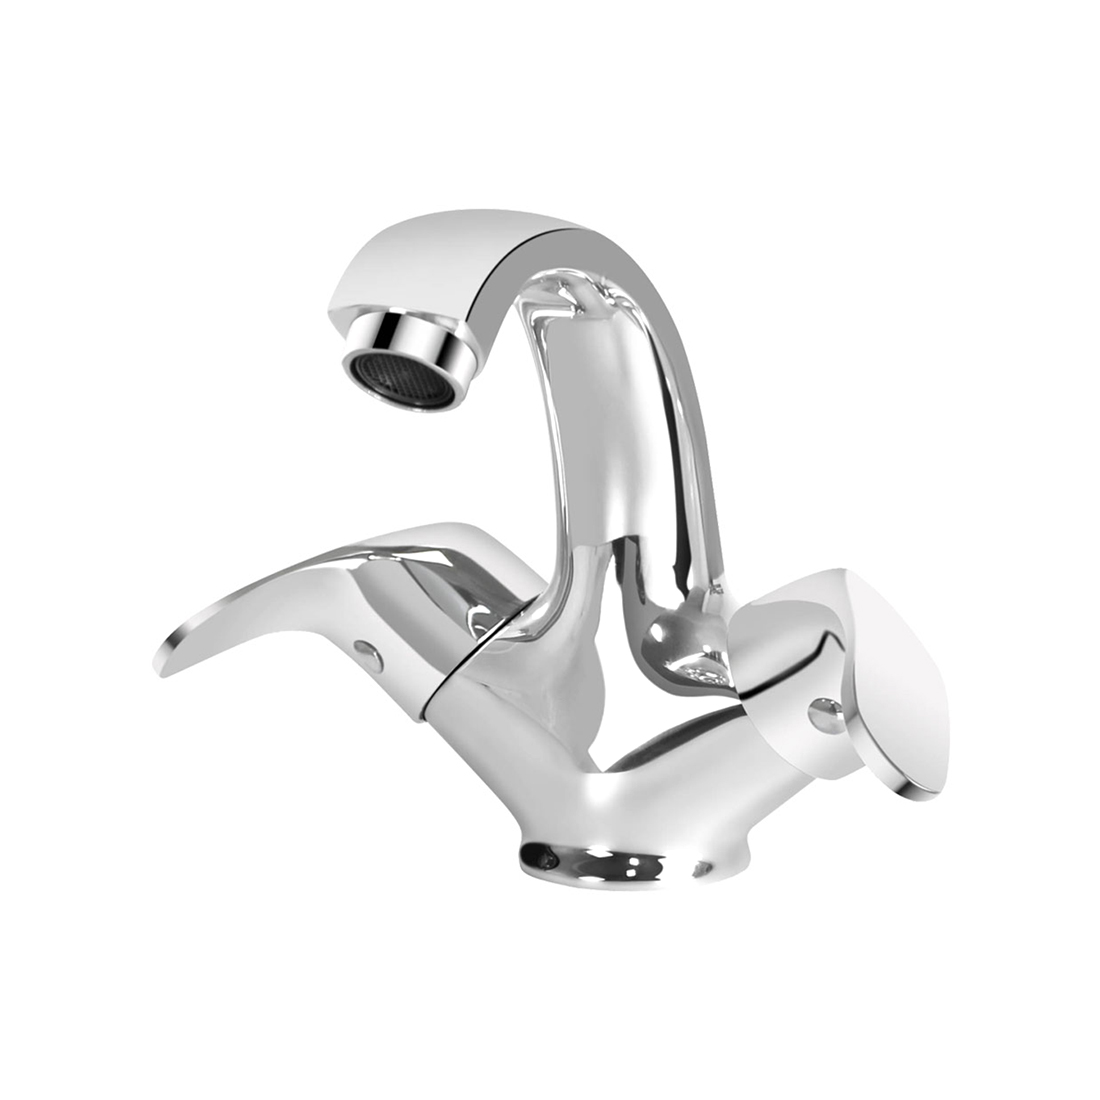 Kerovit Edge KB1211026 Central Hole Basin Mixer With Fixed Spout